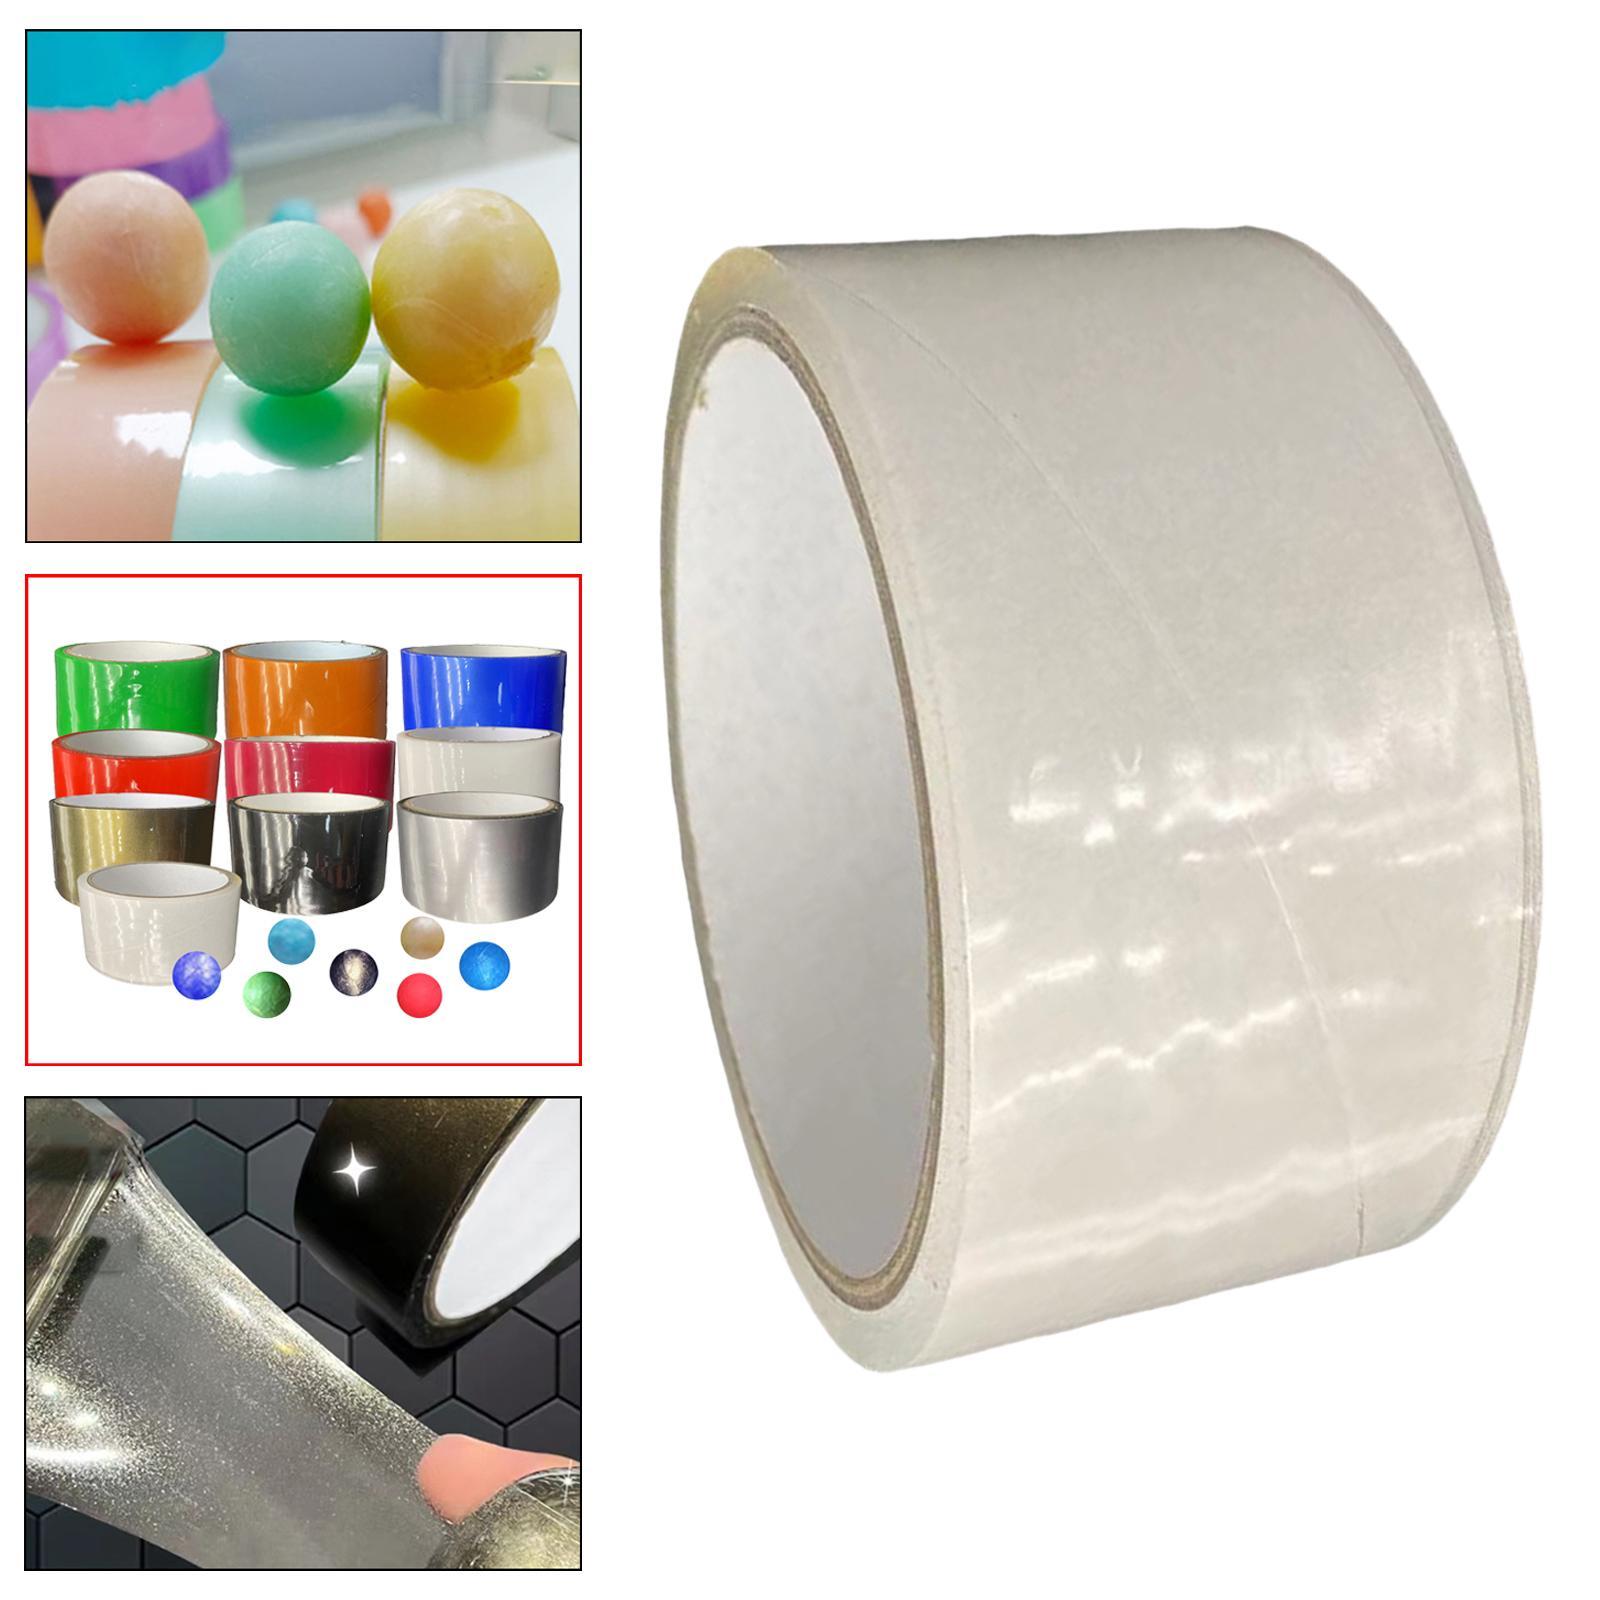 4Pcs Funny Creative Sticky Ball Rolling Tapes Making